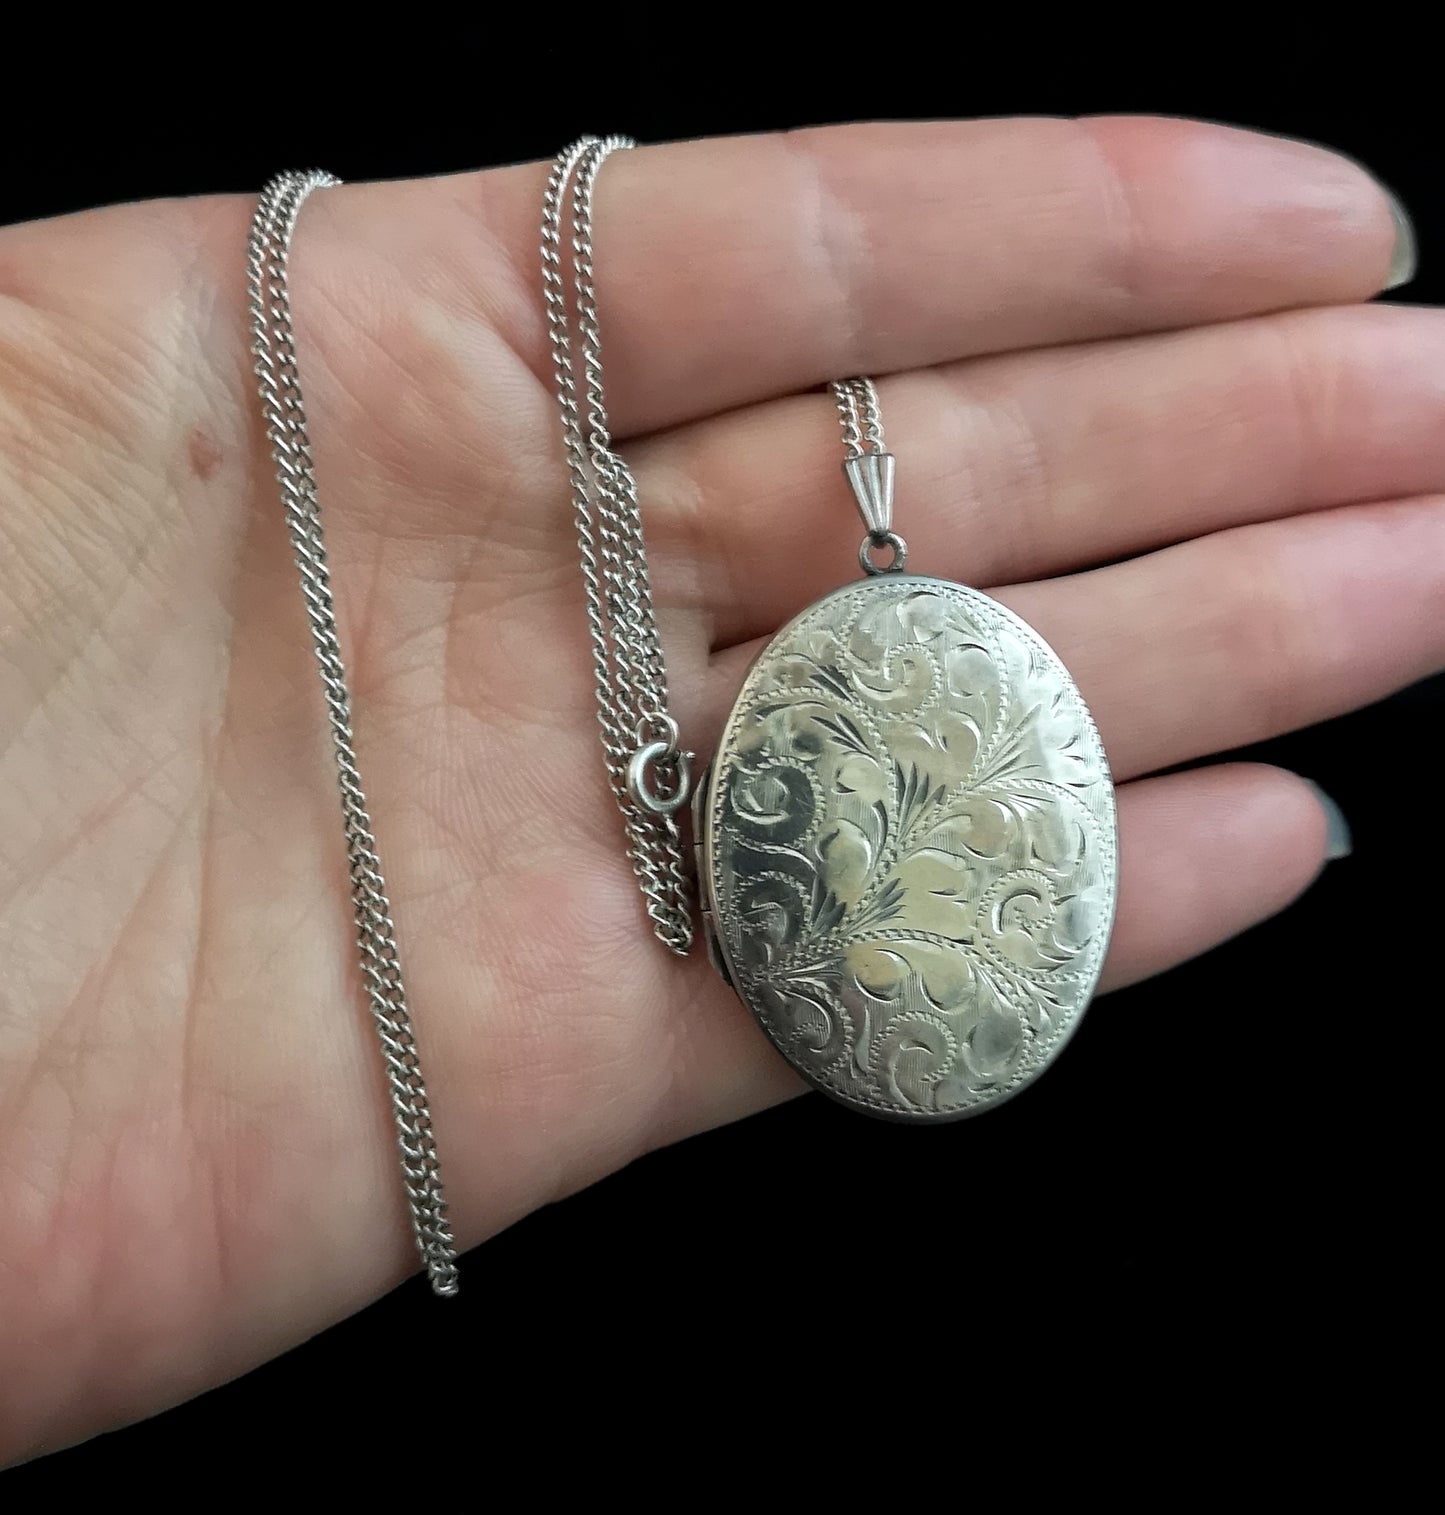 Vintage silver locket and chain, 1970s, necklace